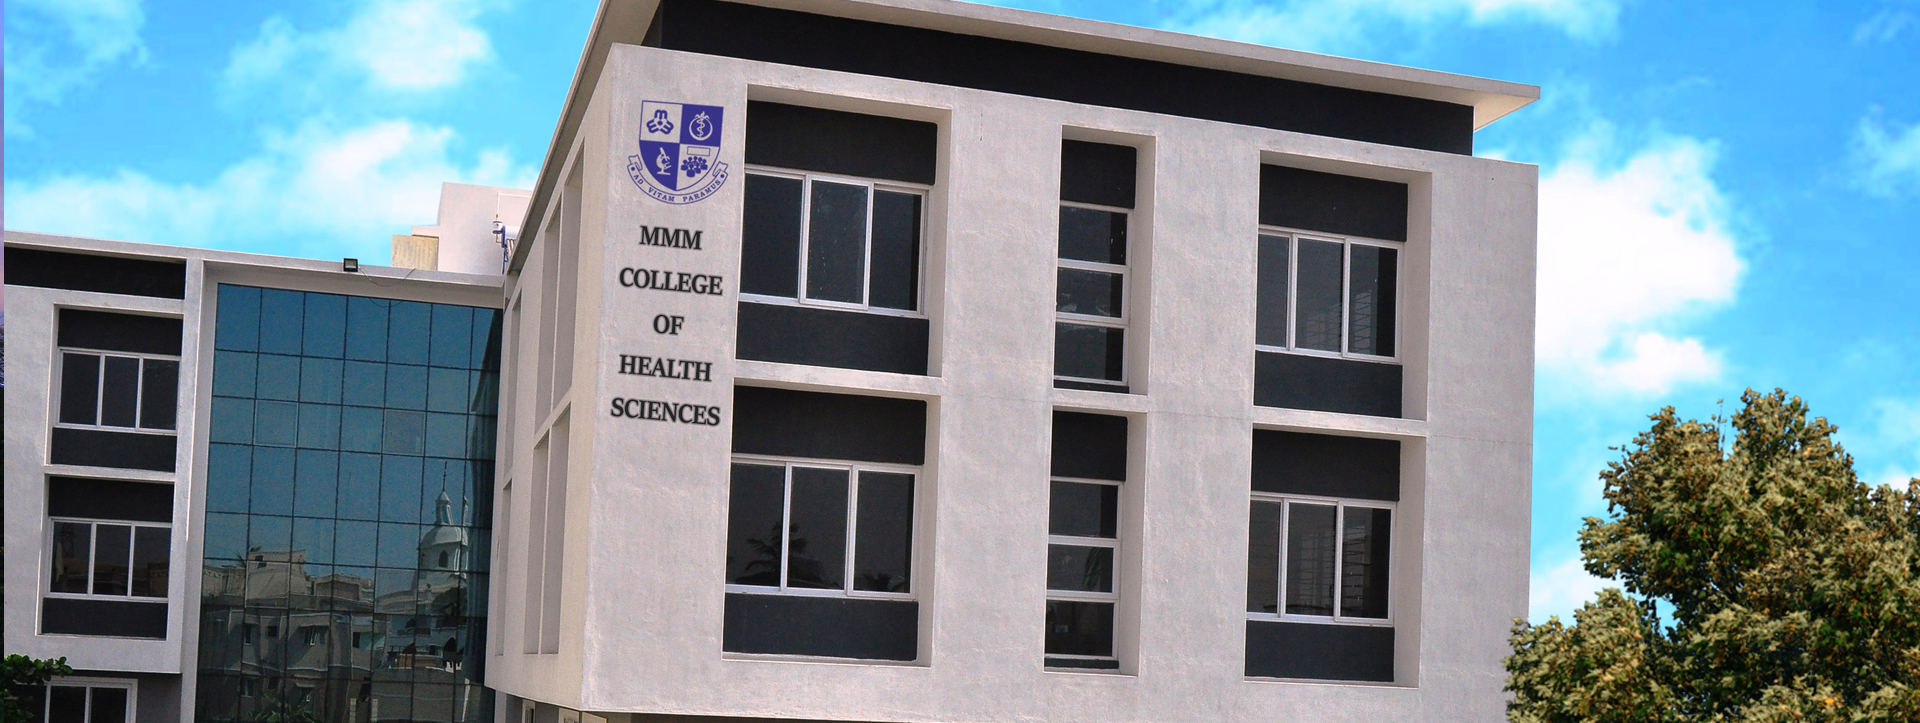 MMM COLLEGE OF HEALTH SCIENCES